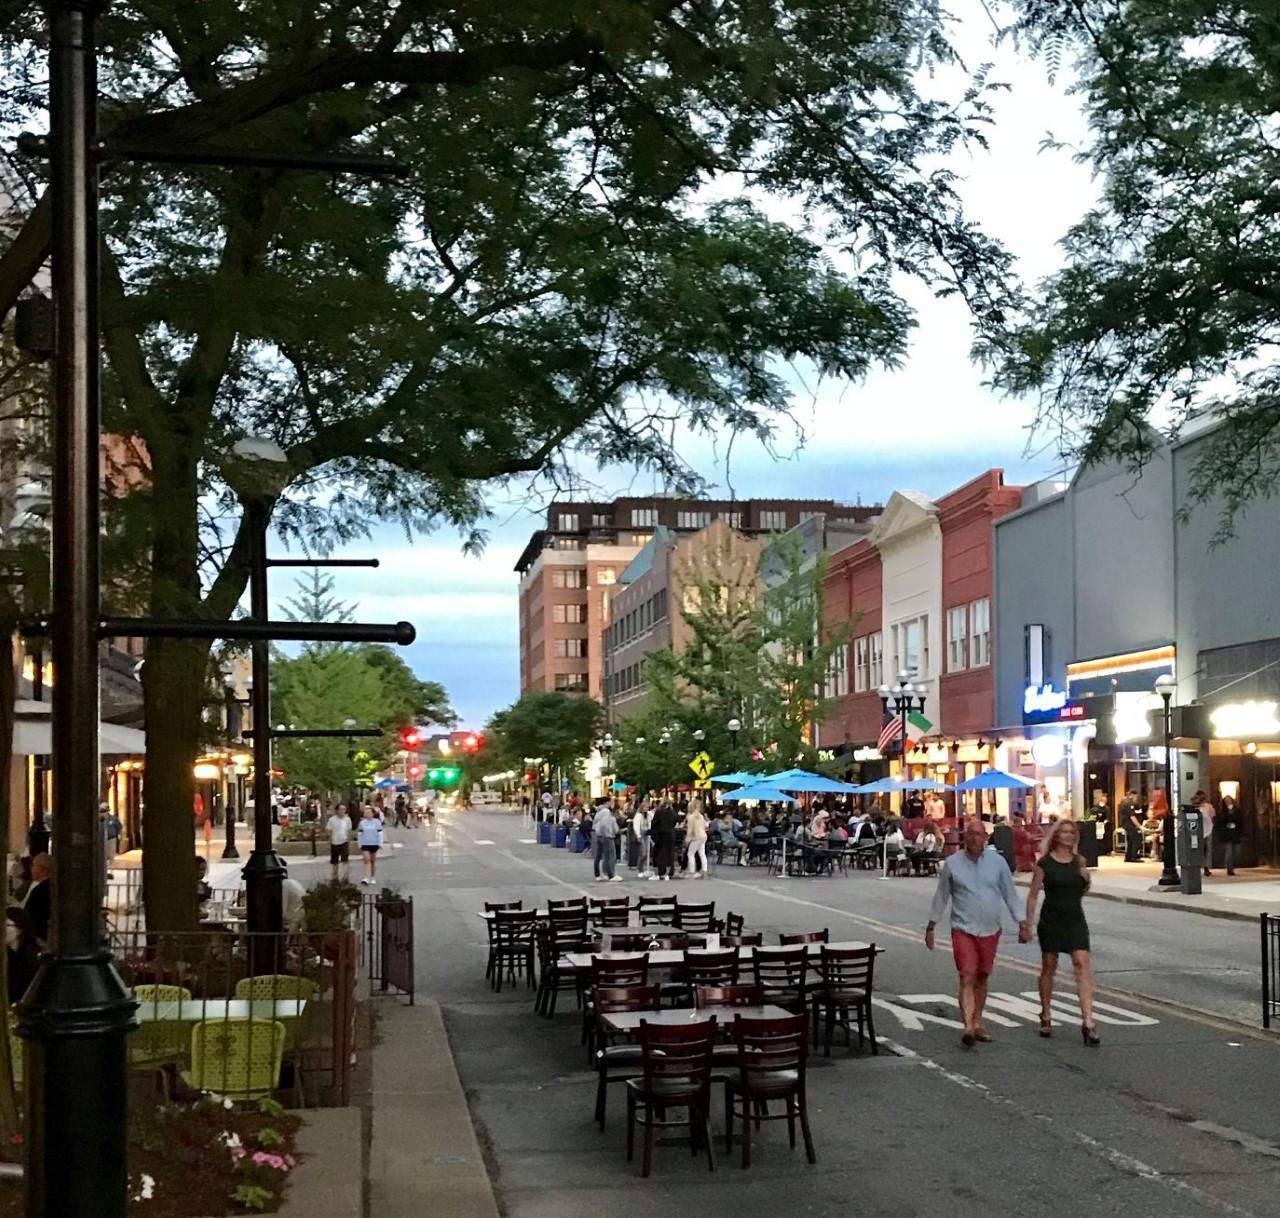 Ann Arbor named among top charming small US cities by TravelMag